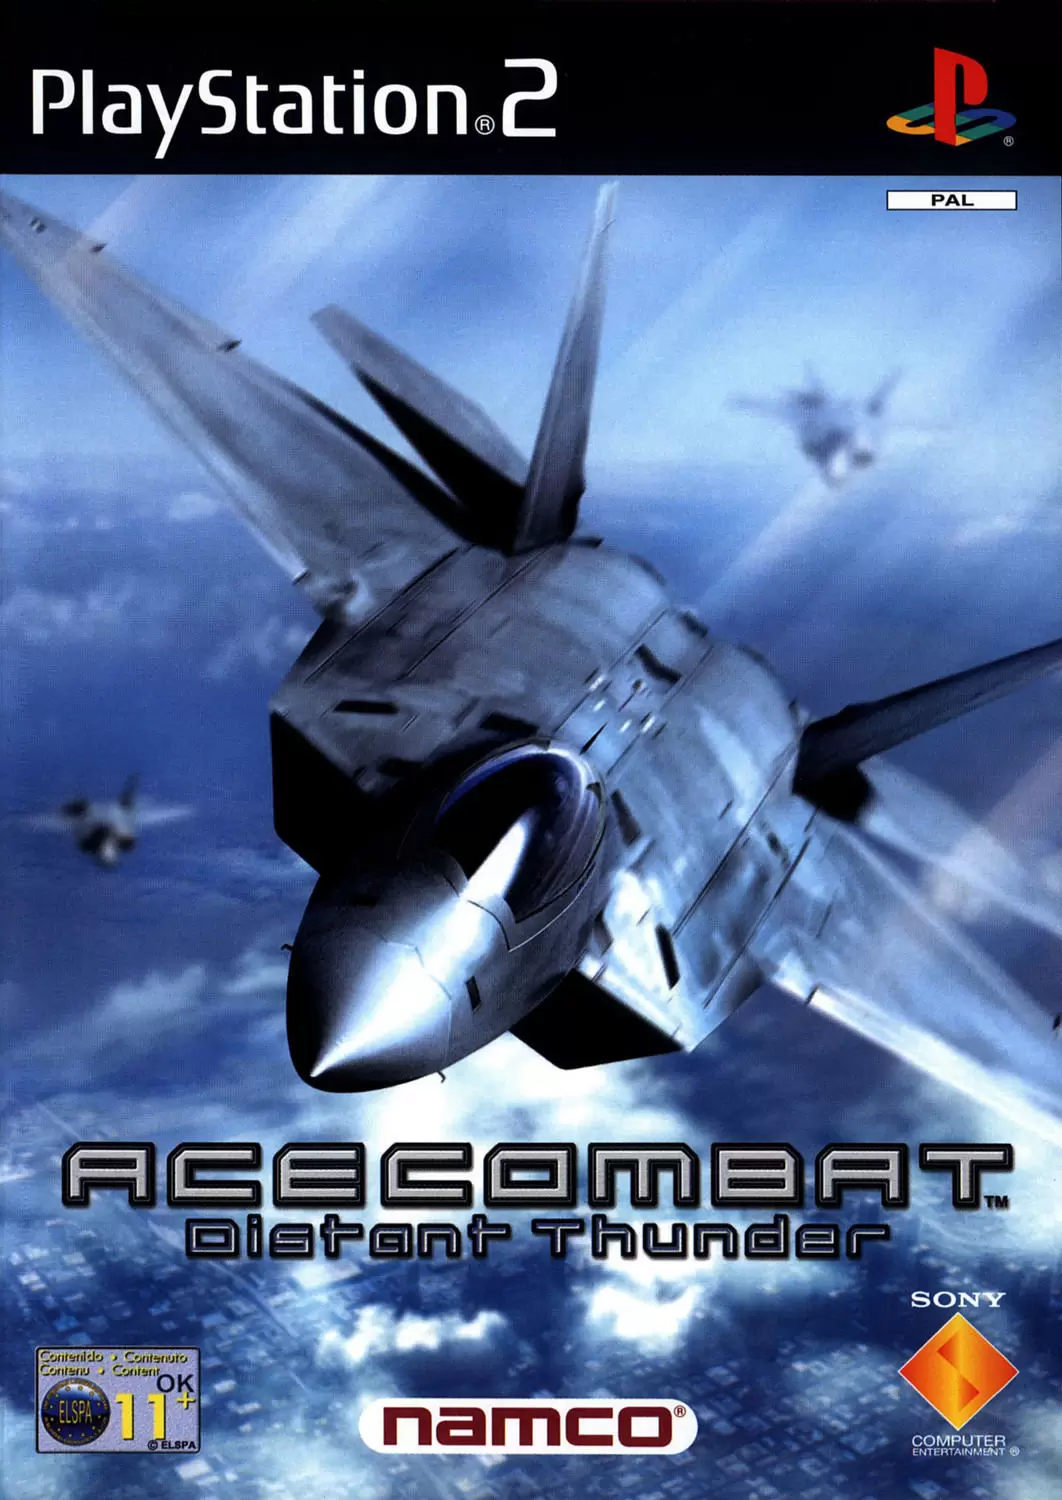 PS2 Games - Ace Combat: Distant Thunder